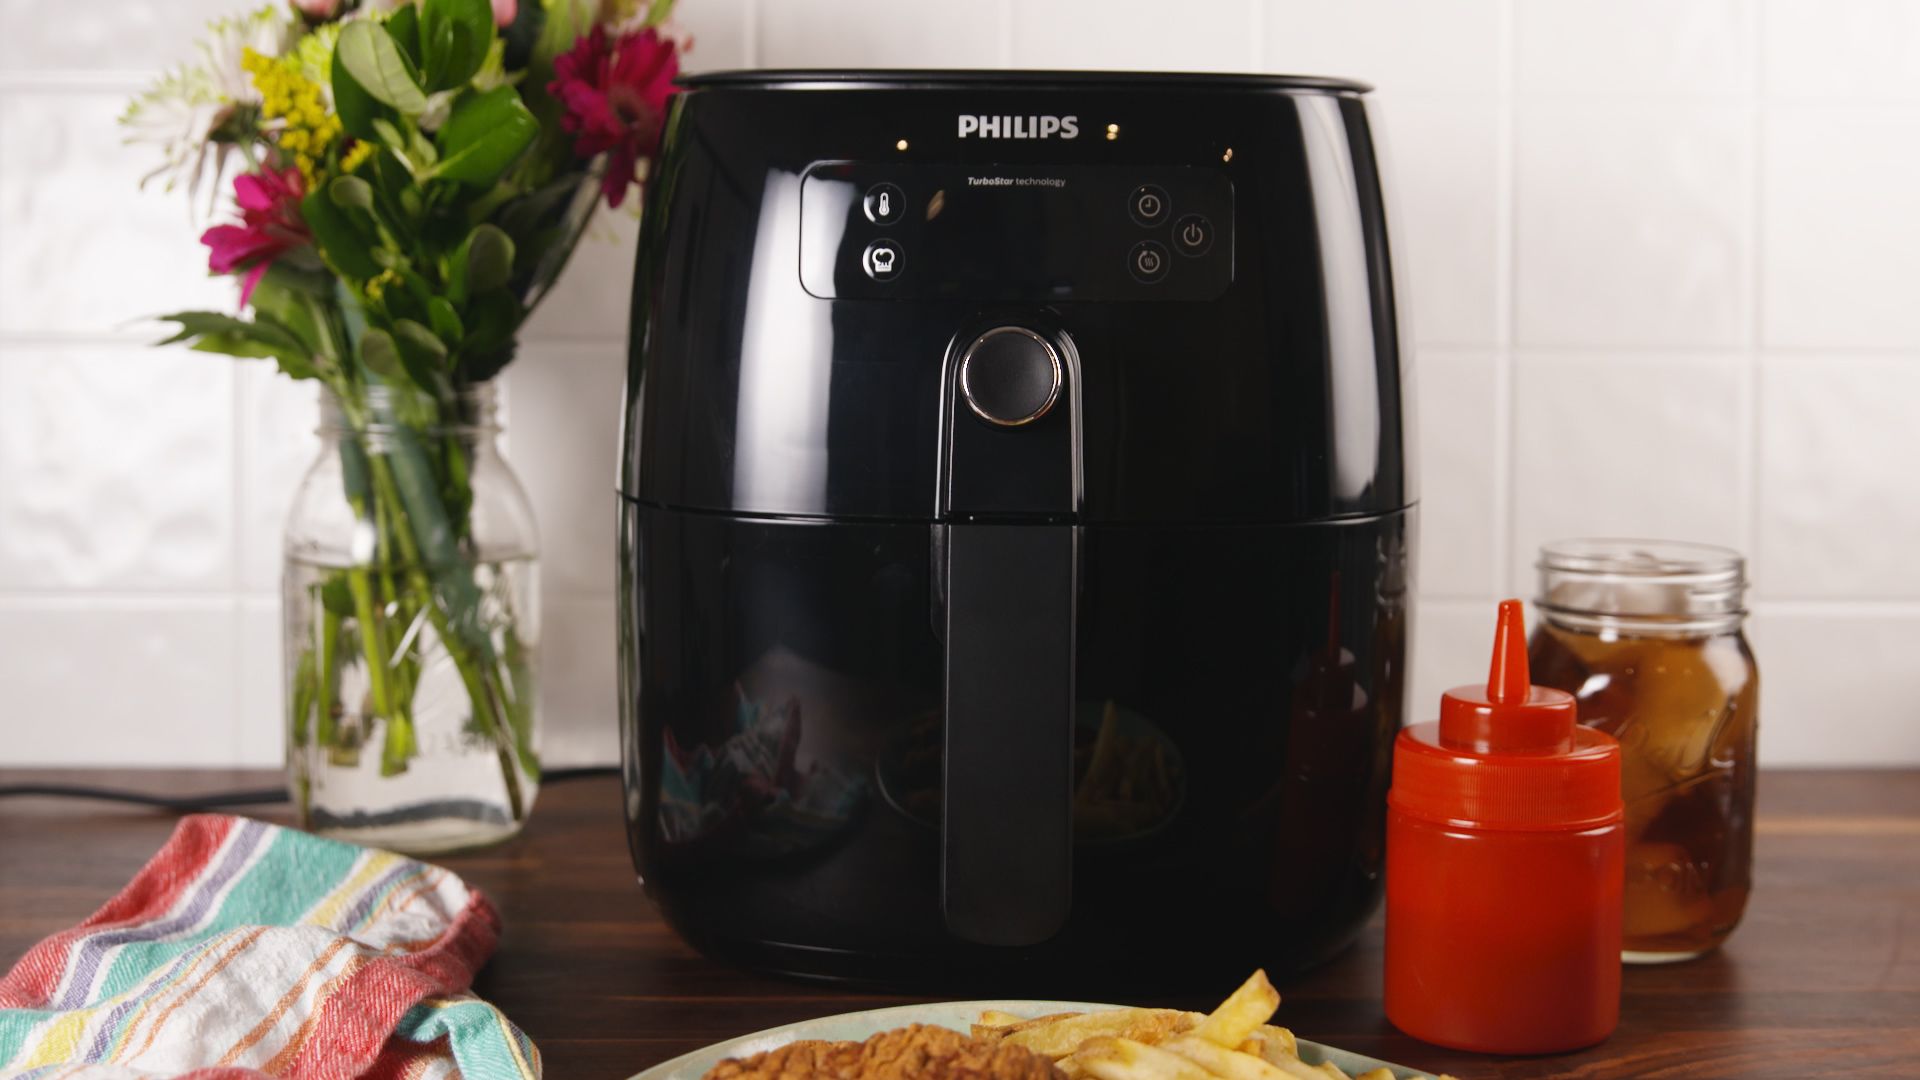 haar adverteren kleding How to Use An Air Fryer - We Tested to See If Air Fryers Really Work